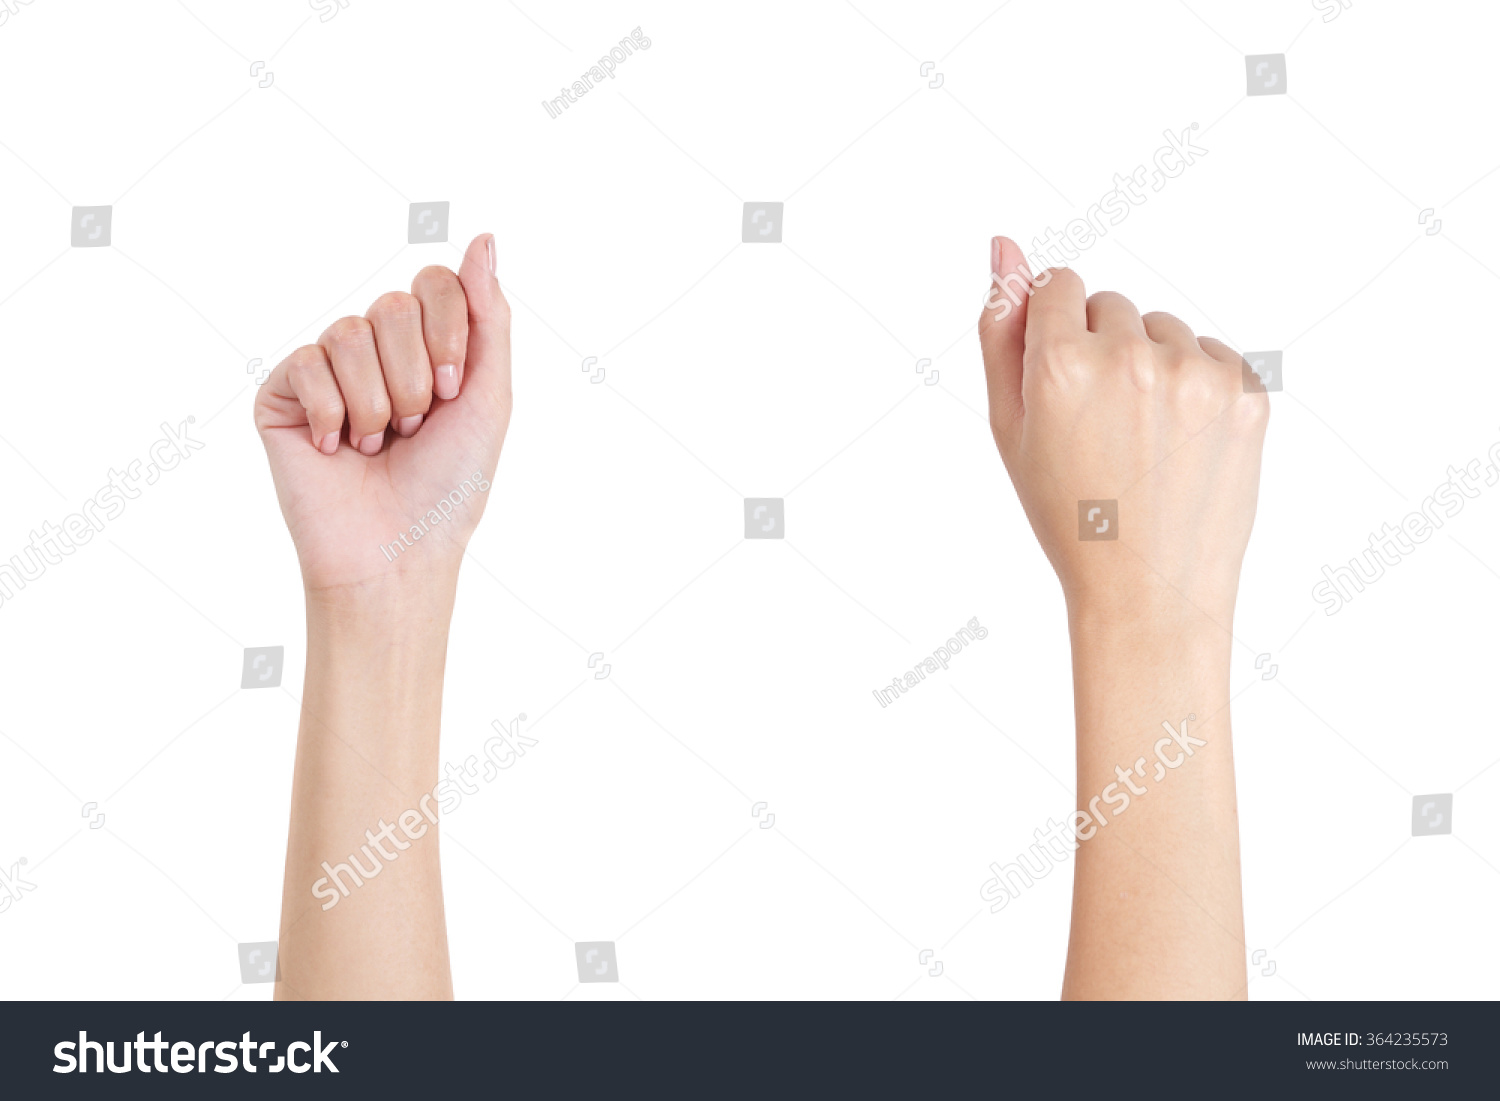 Woman's hands with fist gesture front and back side, Isolated on white background. #364235573